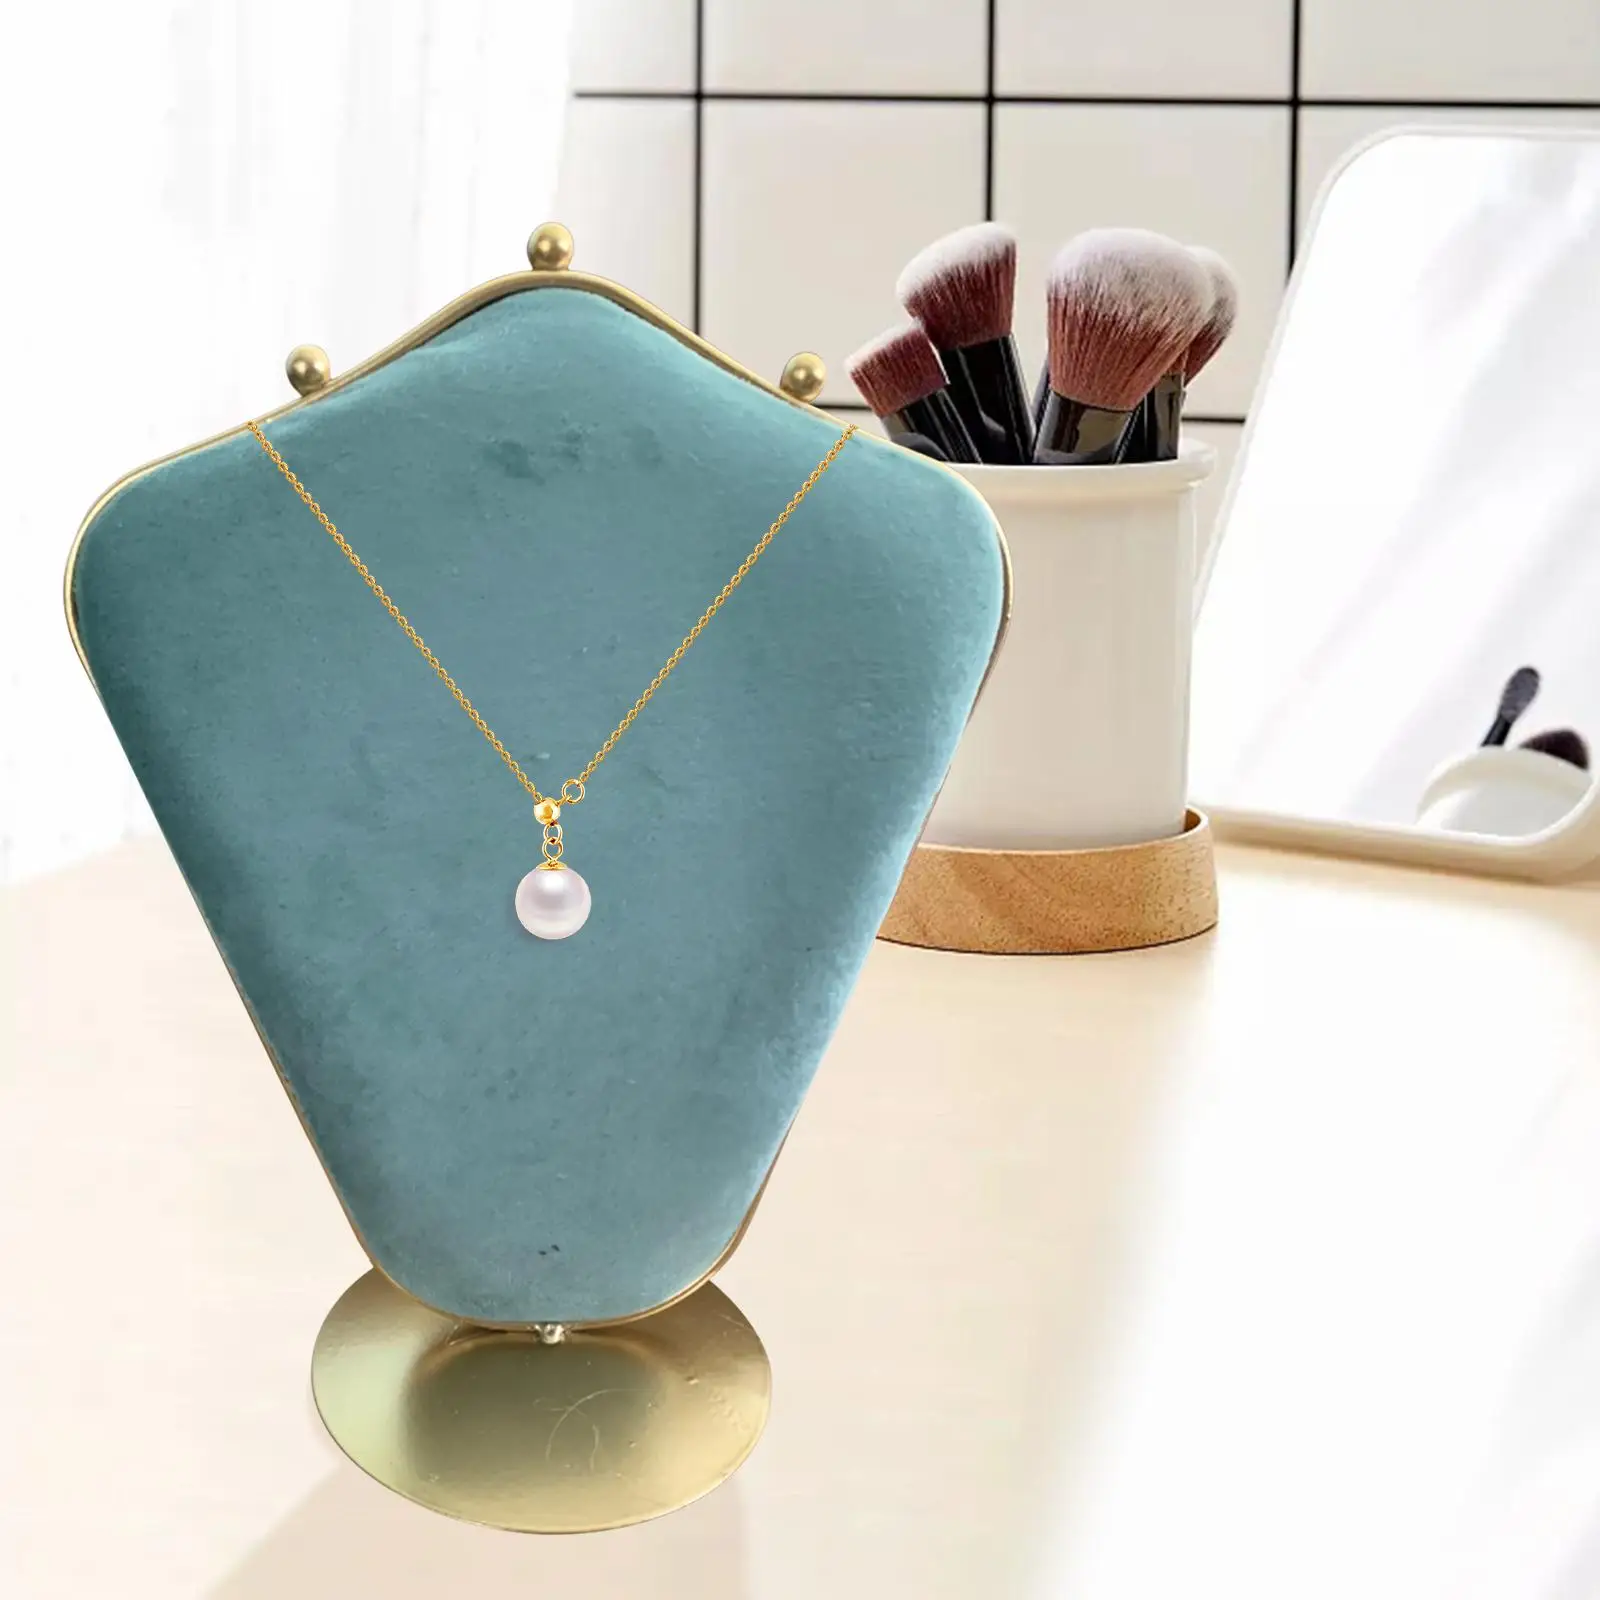 Modern Necklace Pendant Display Holder Household Shows